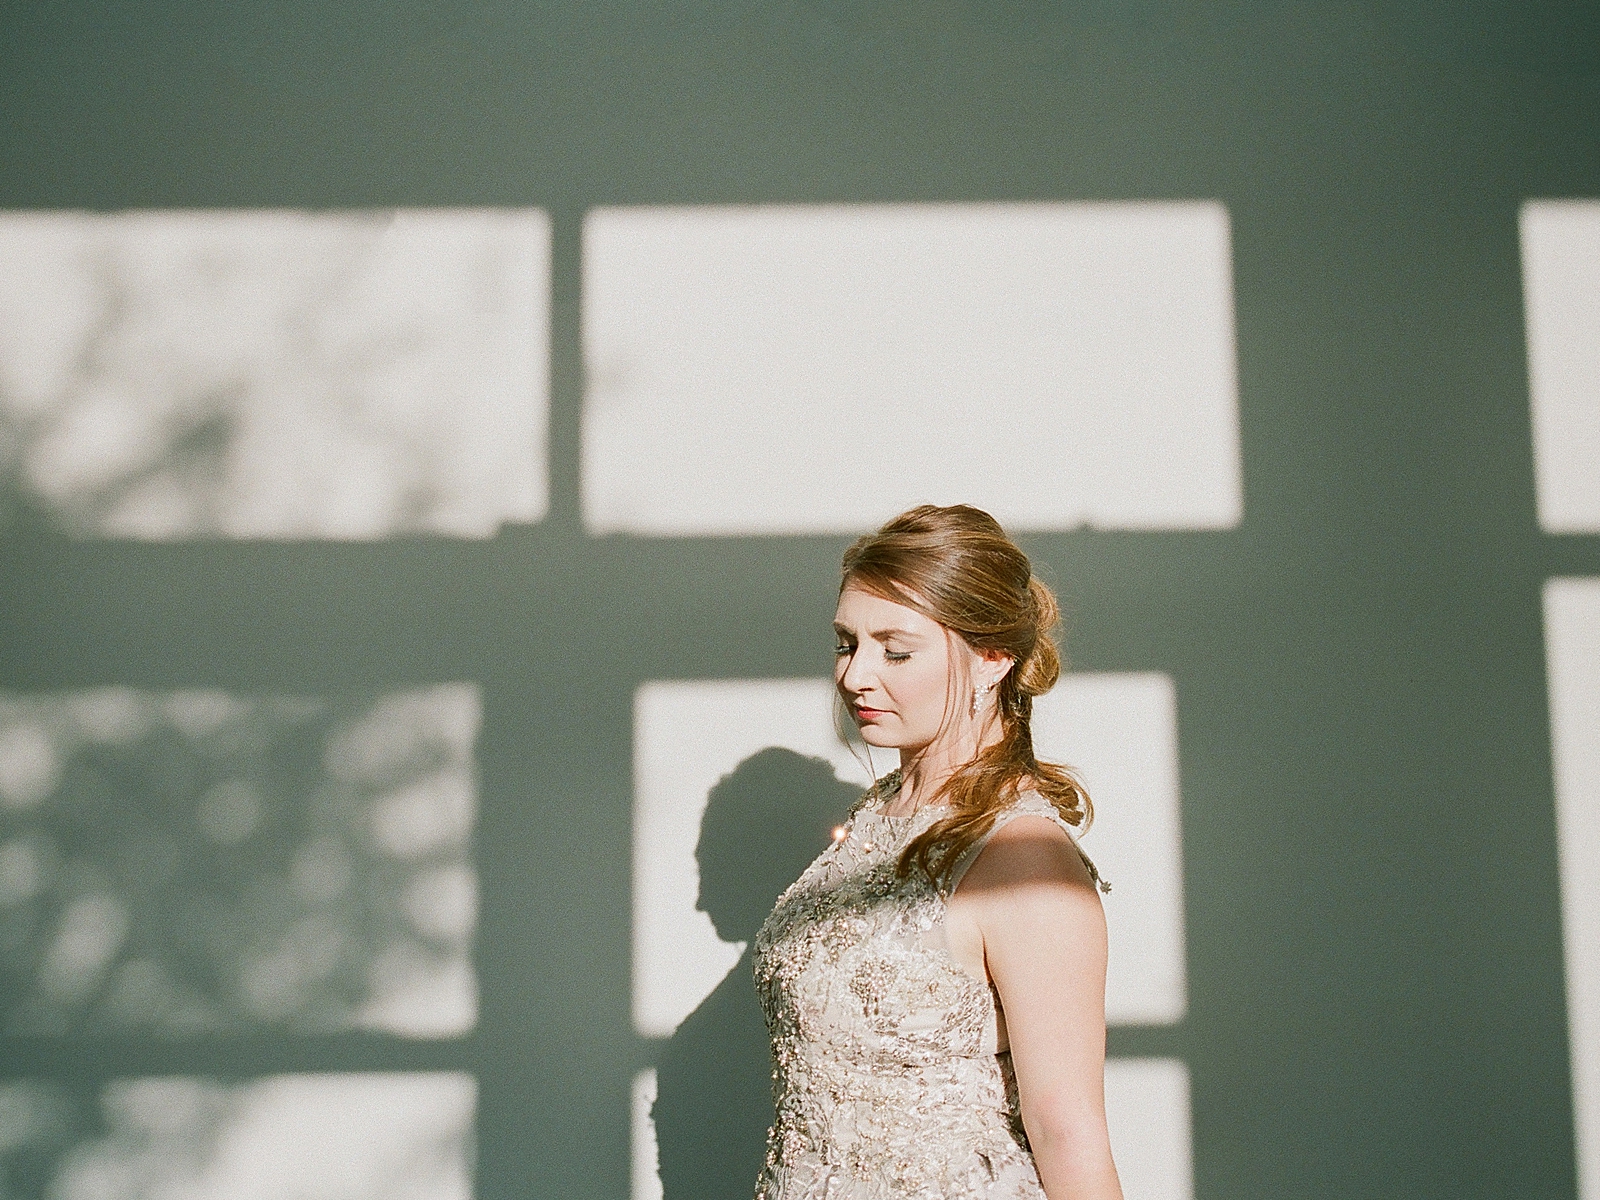 Asheville Bridal Editorial Bride Looking Down with Shadows on the Wall Photo